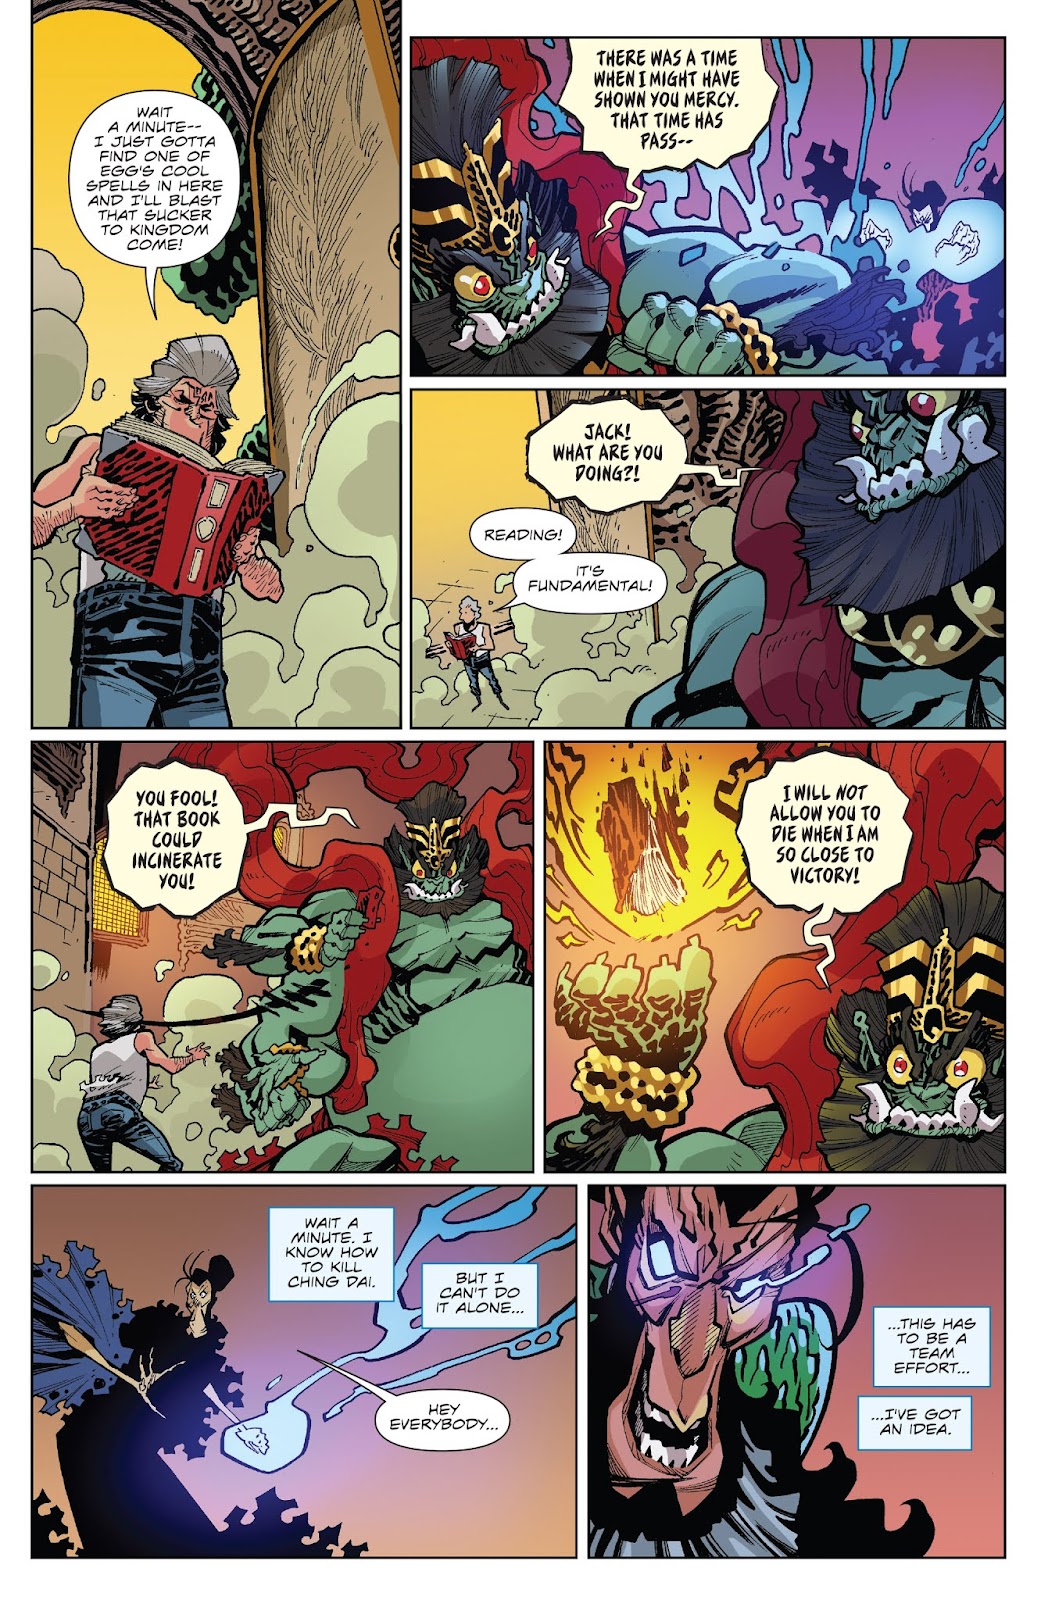 Big Trouble in Little China: Old Man Jack issue 9 - Page 19